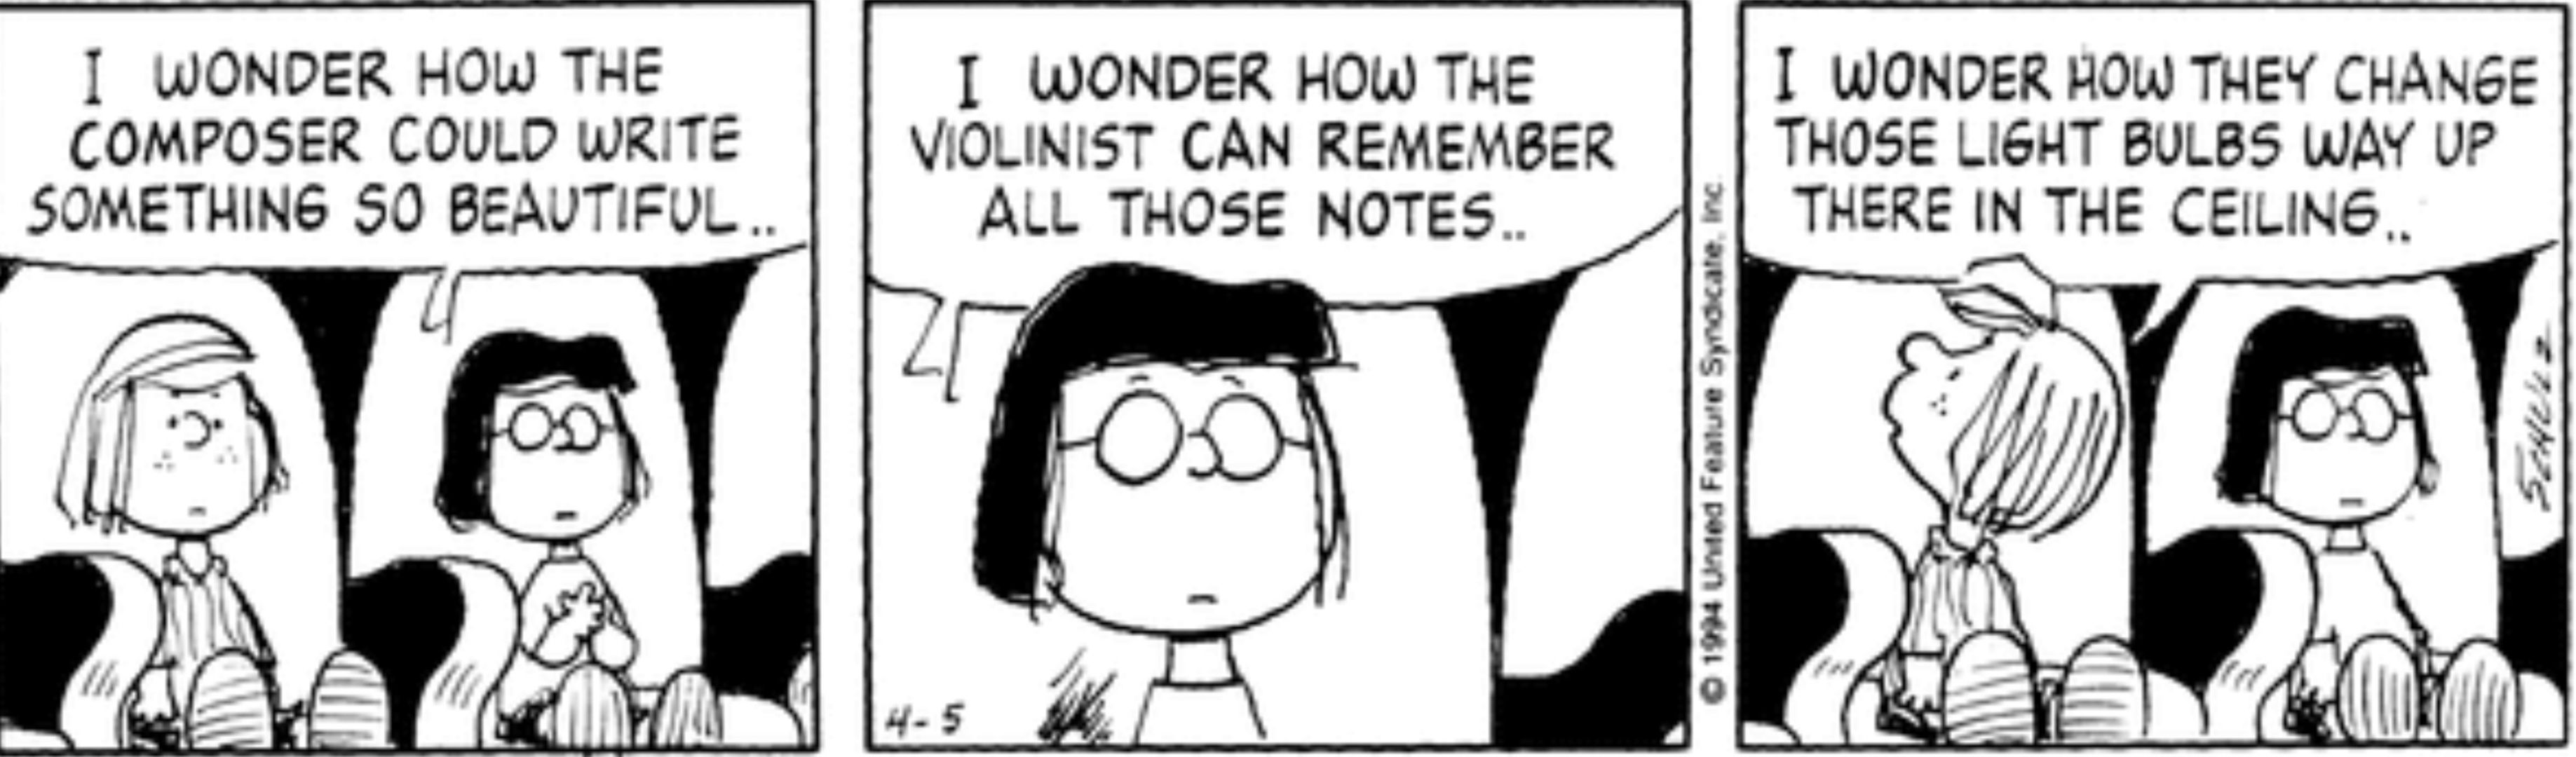 Peppermint Patty is distracted by light bulbs while Marcie enjoys an orchestral performance.